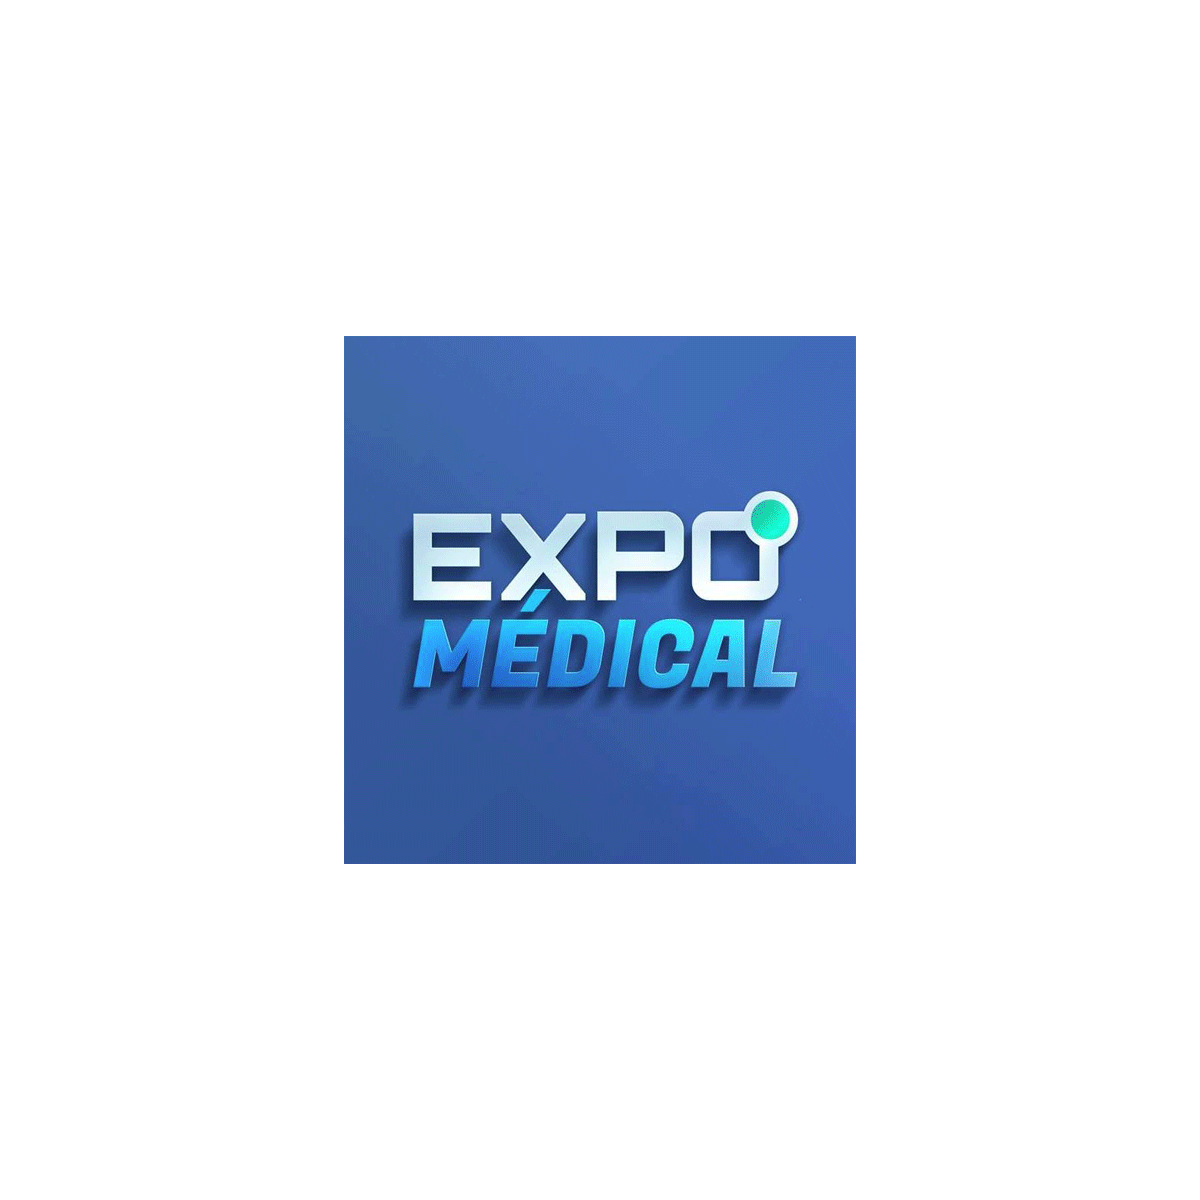 expomedical